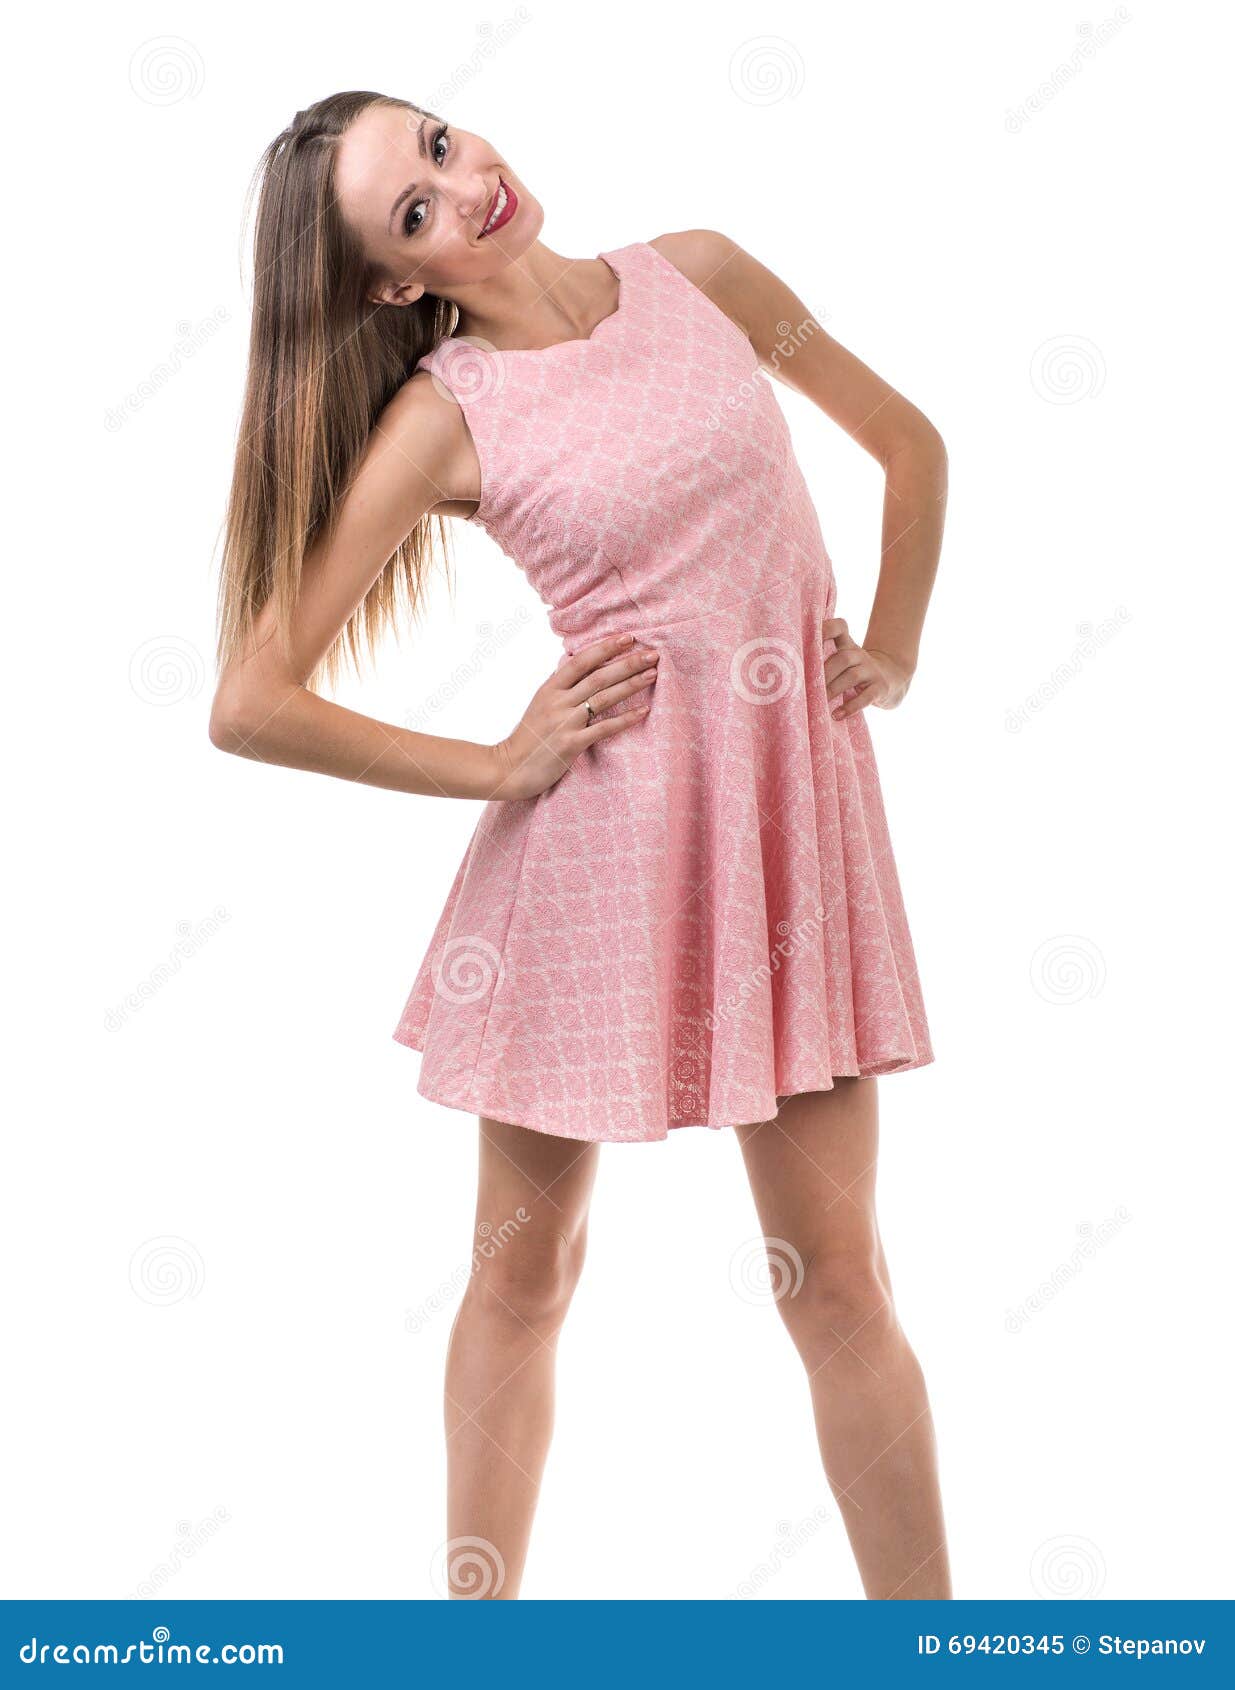 Sensual Woman in Short Dress Dancing Against Isolated White Stock Image ...